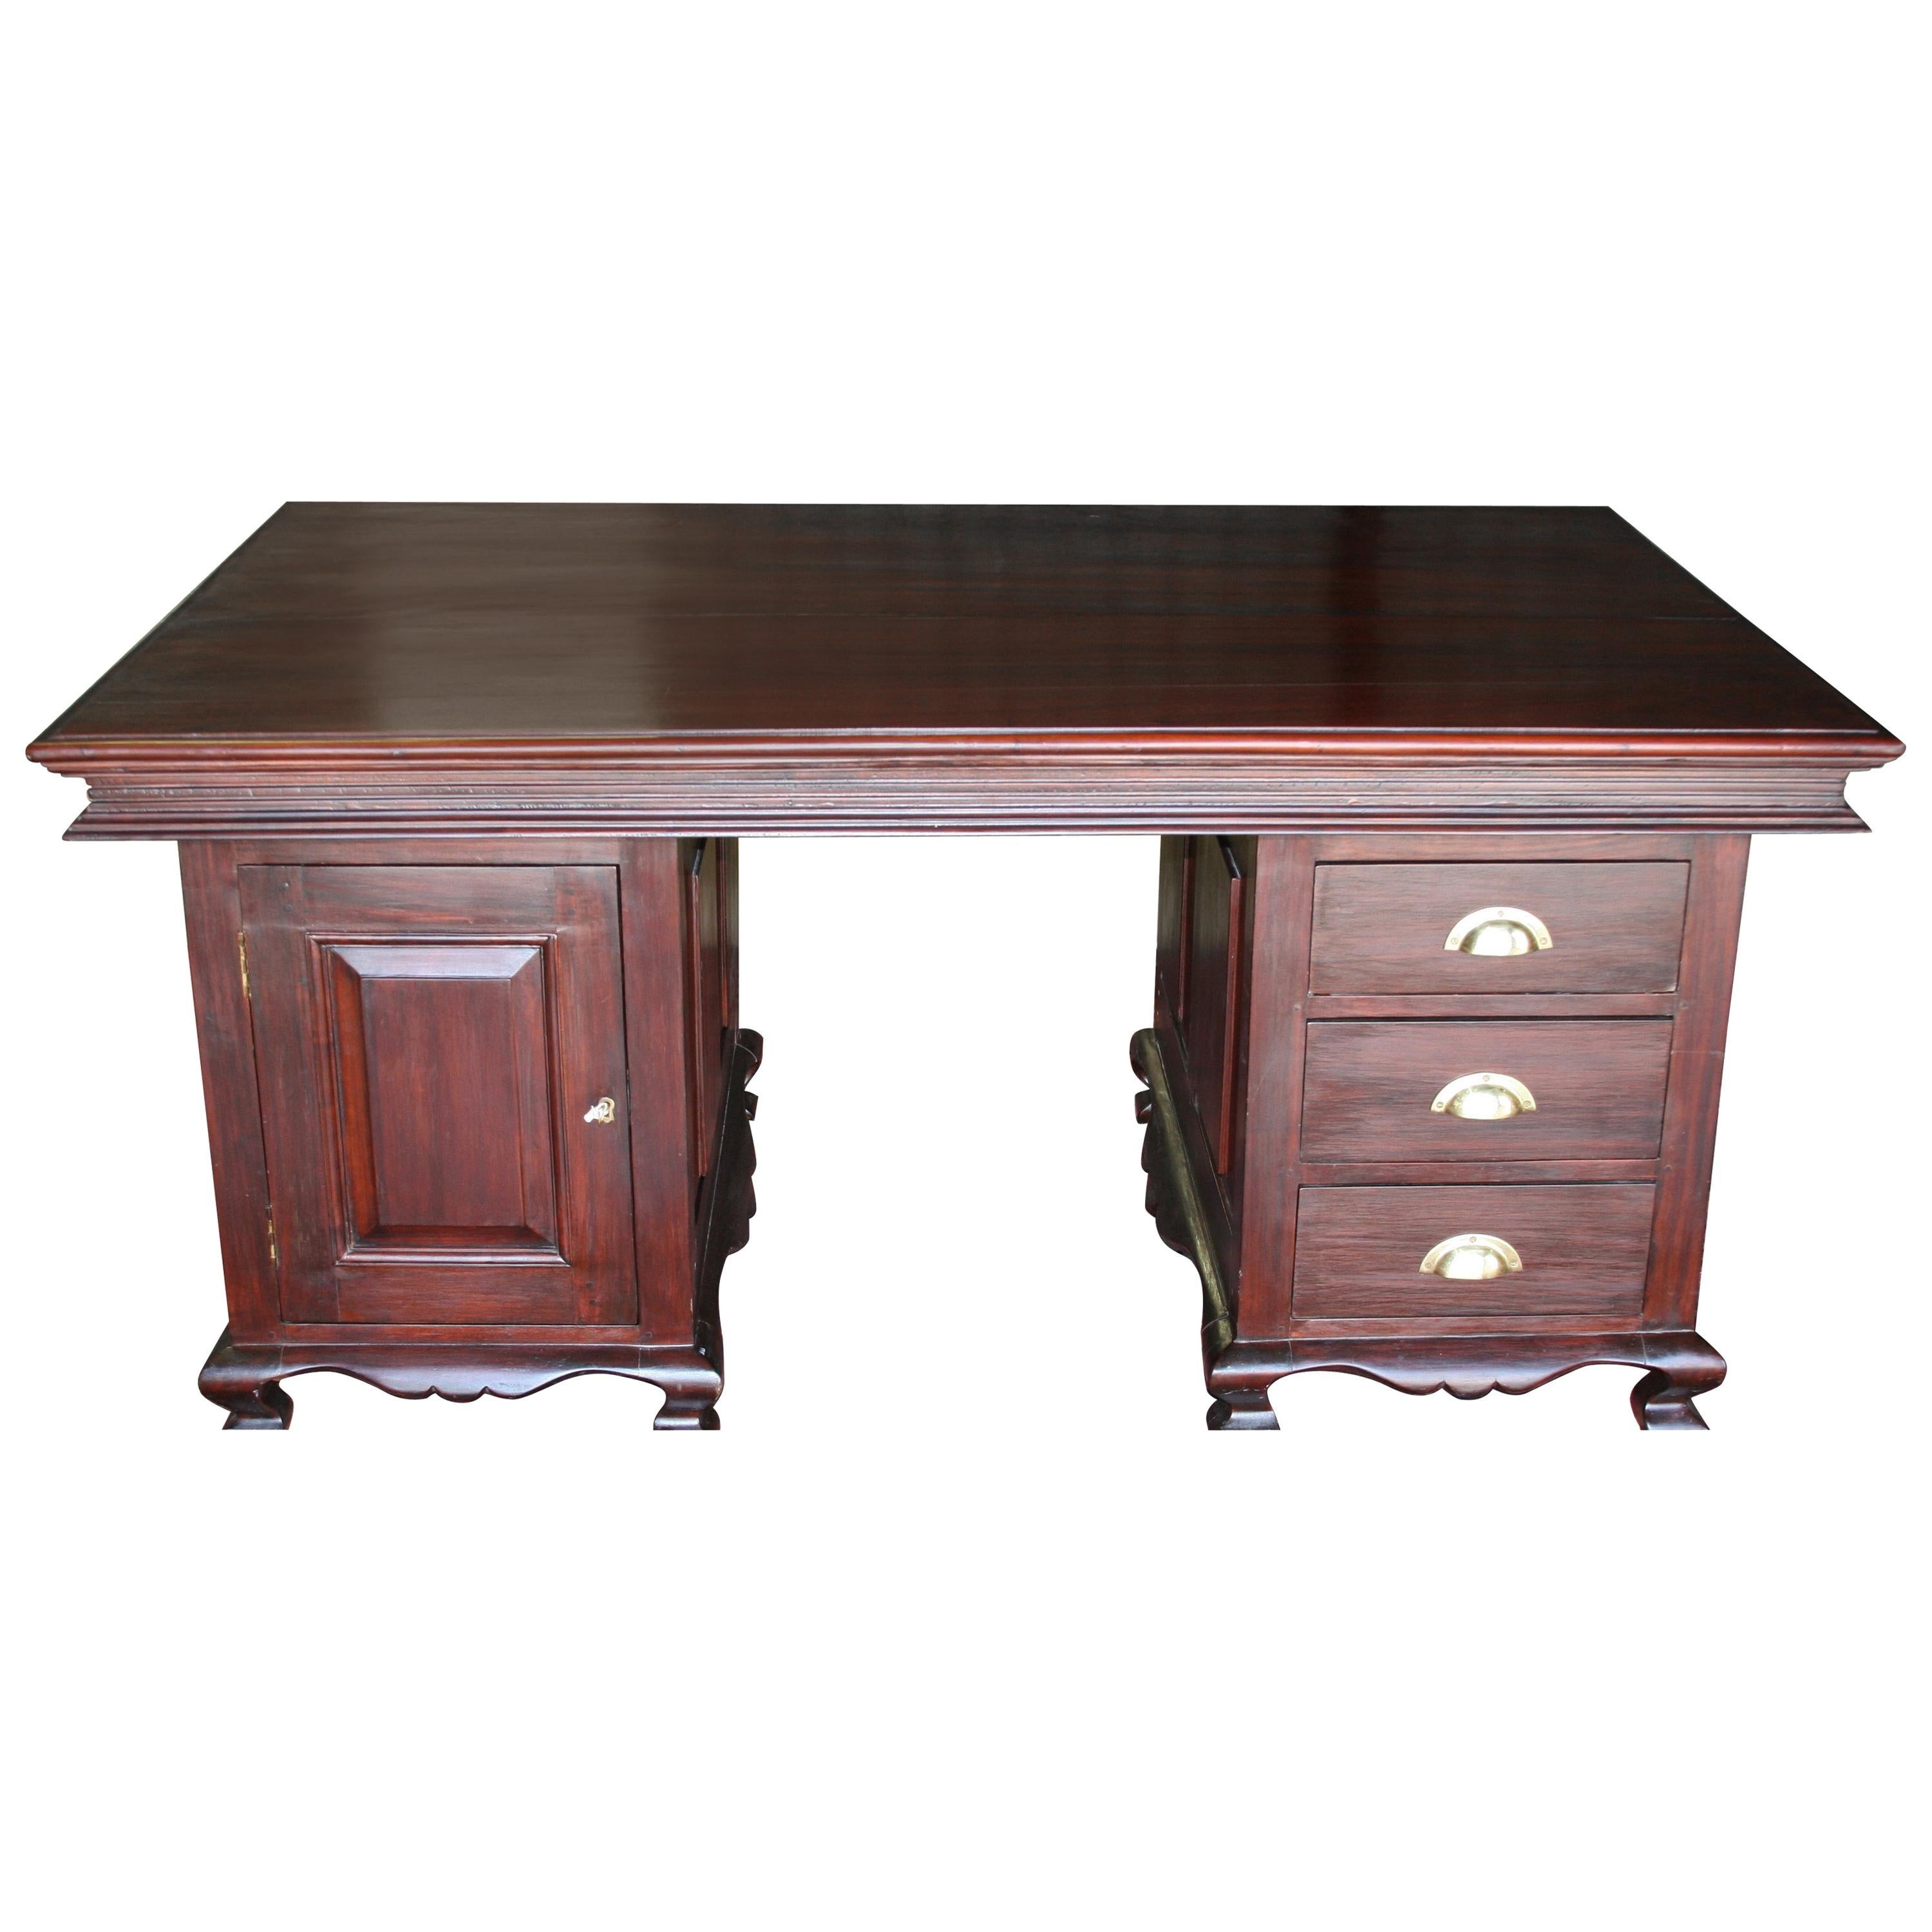 Early 20th Century Magnificent Custom Handcrafted Nedun Wood Desk         For Sale